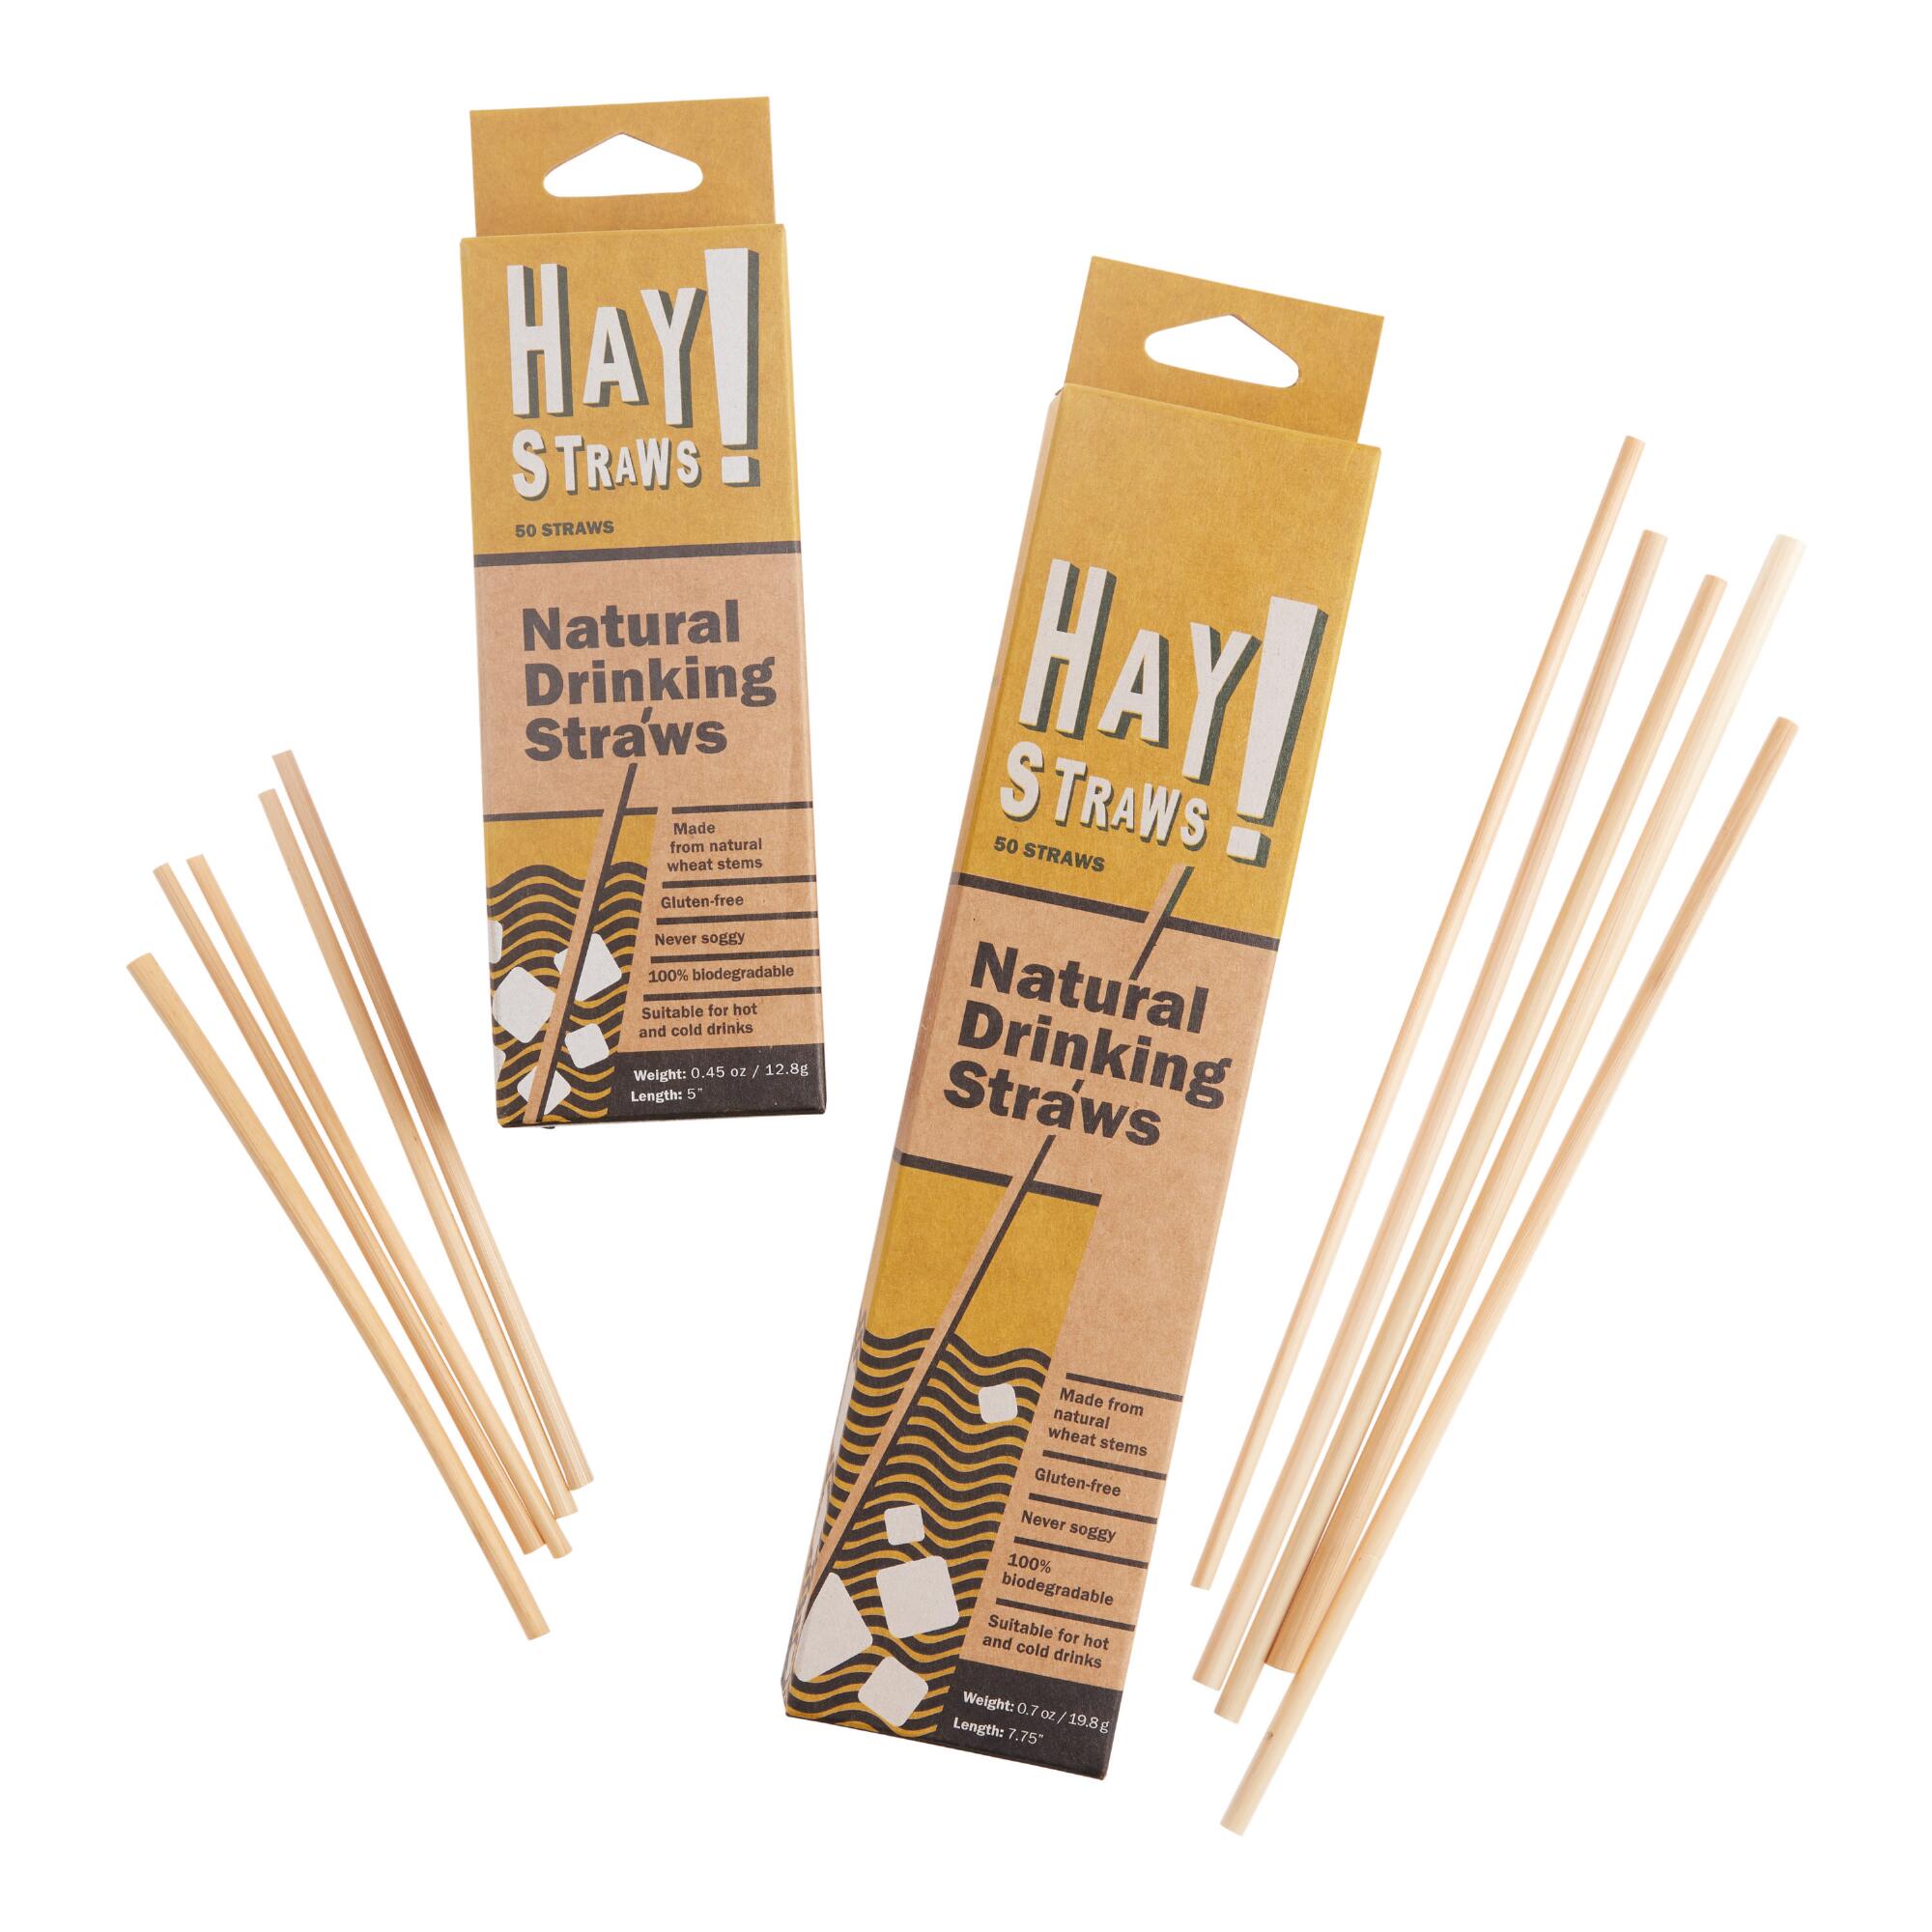 Hay Straws Natural Drinking Straws 50 Pack: Yellow by World Market